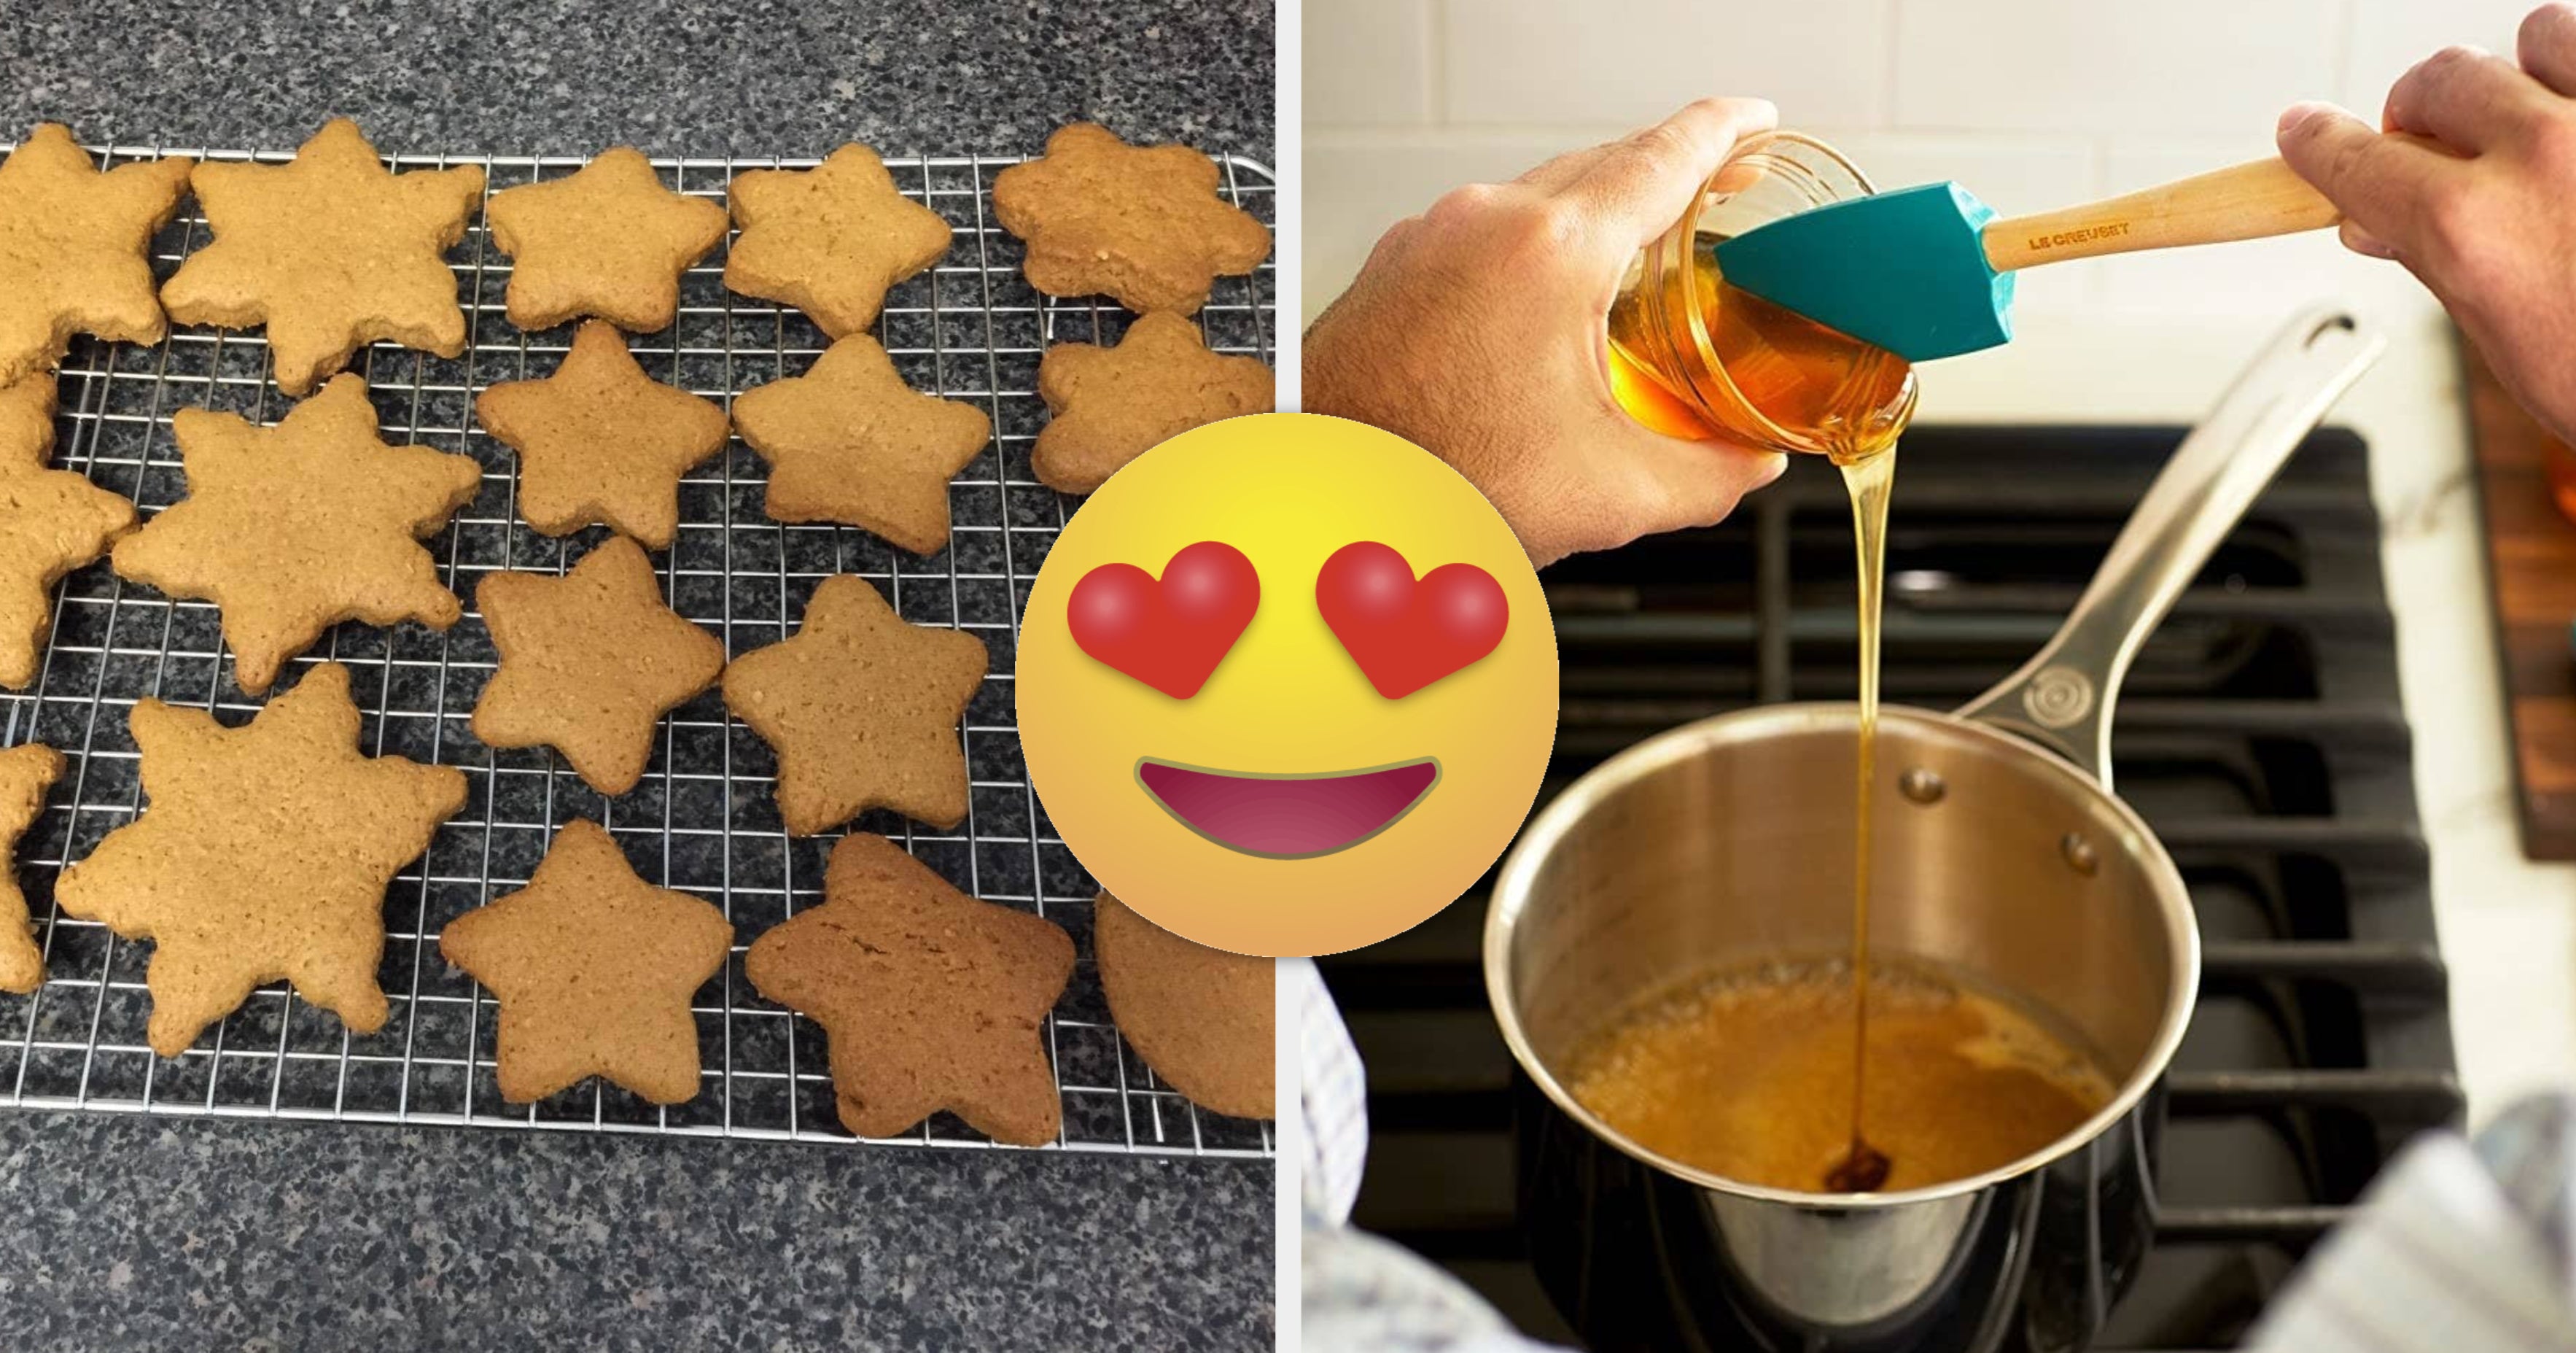 37 Kitchen Products To Help You Bake More In 2022